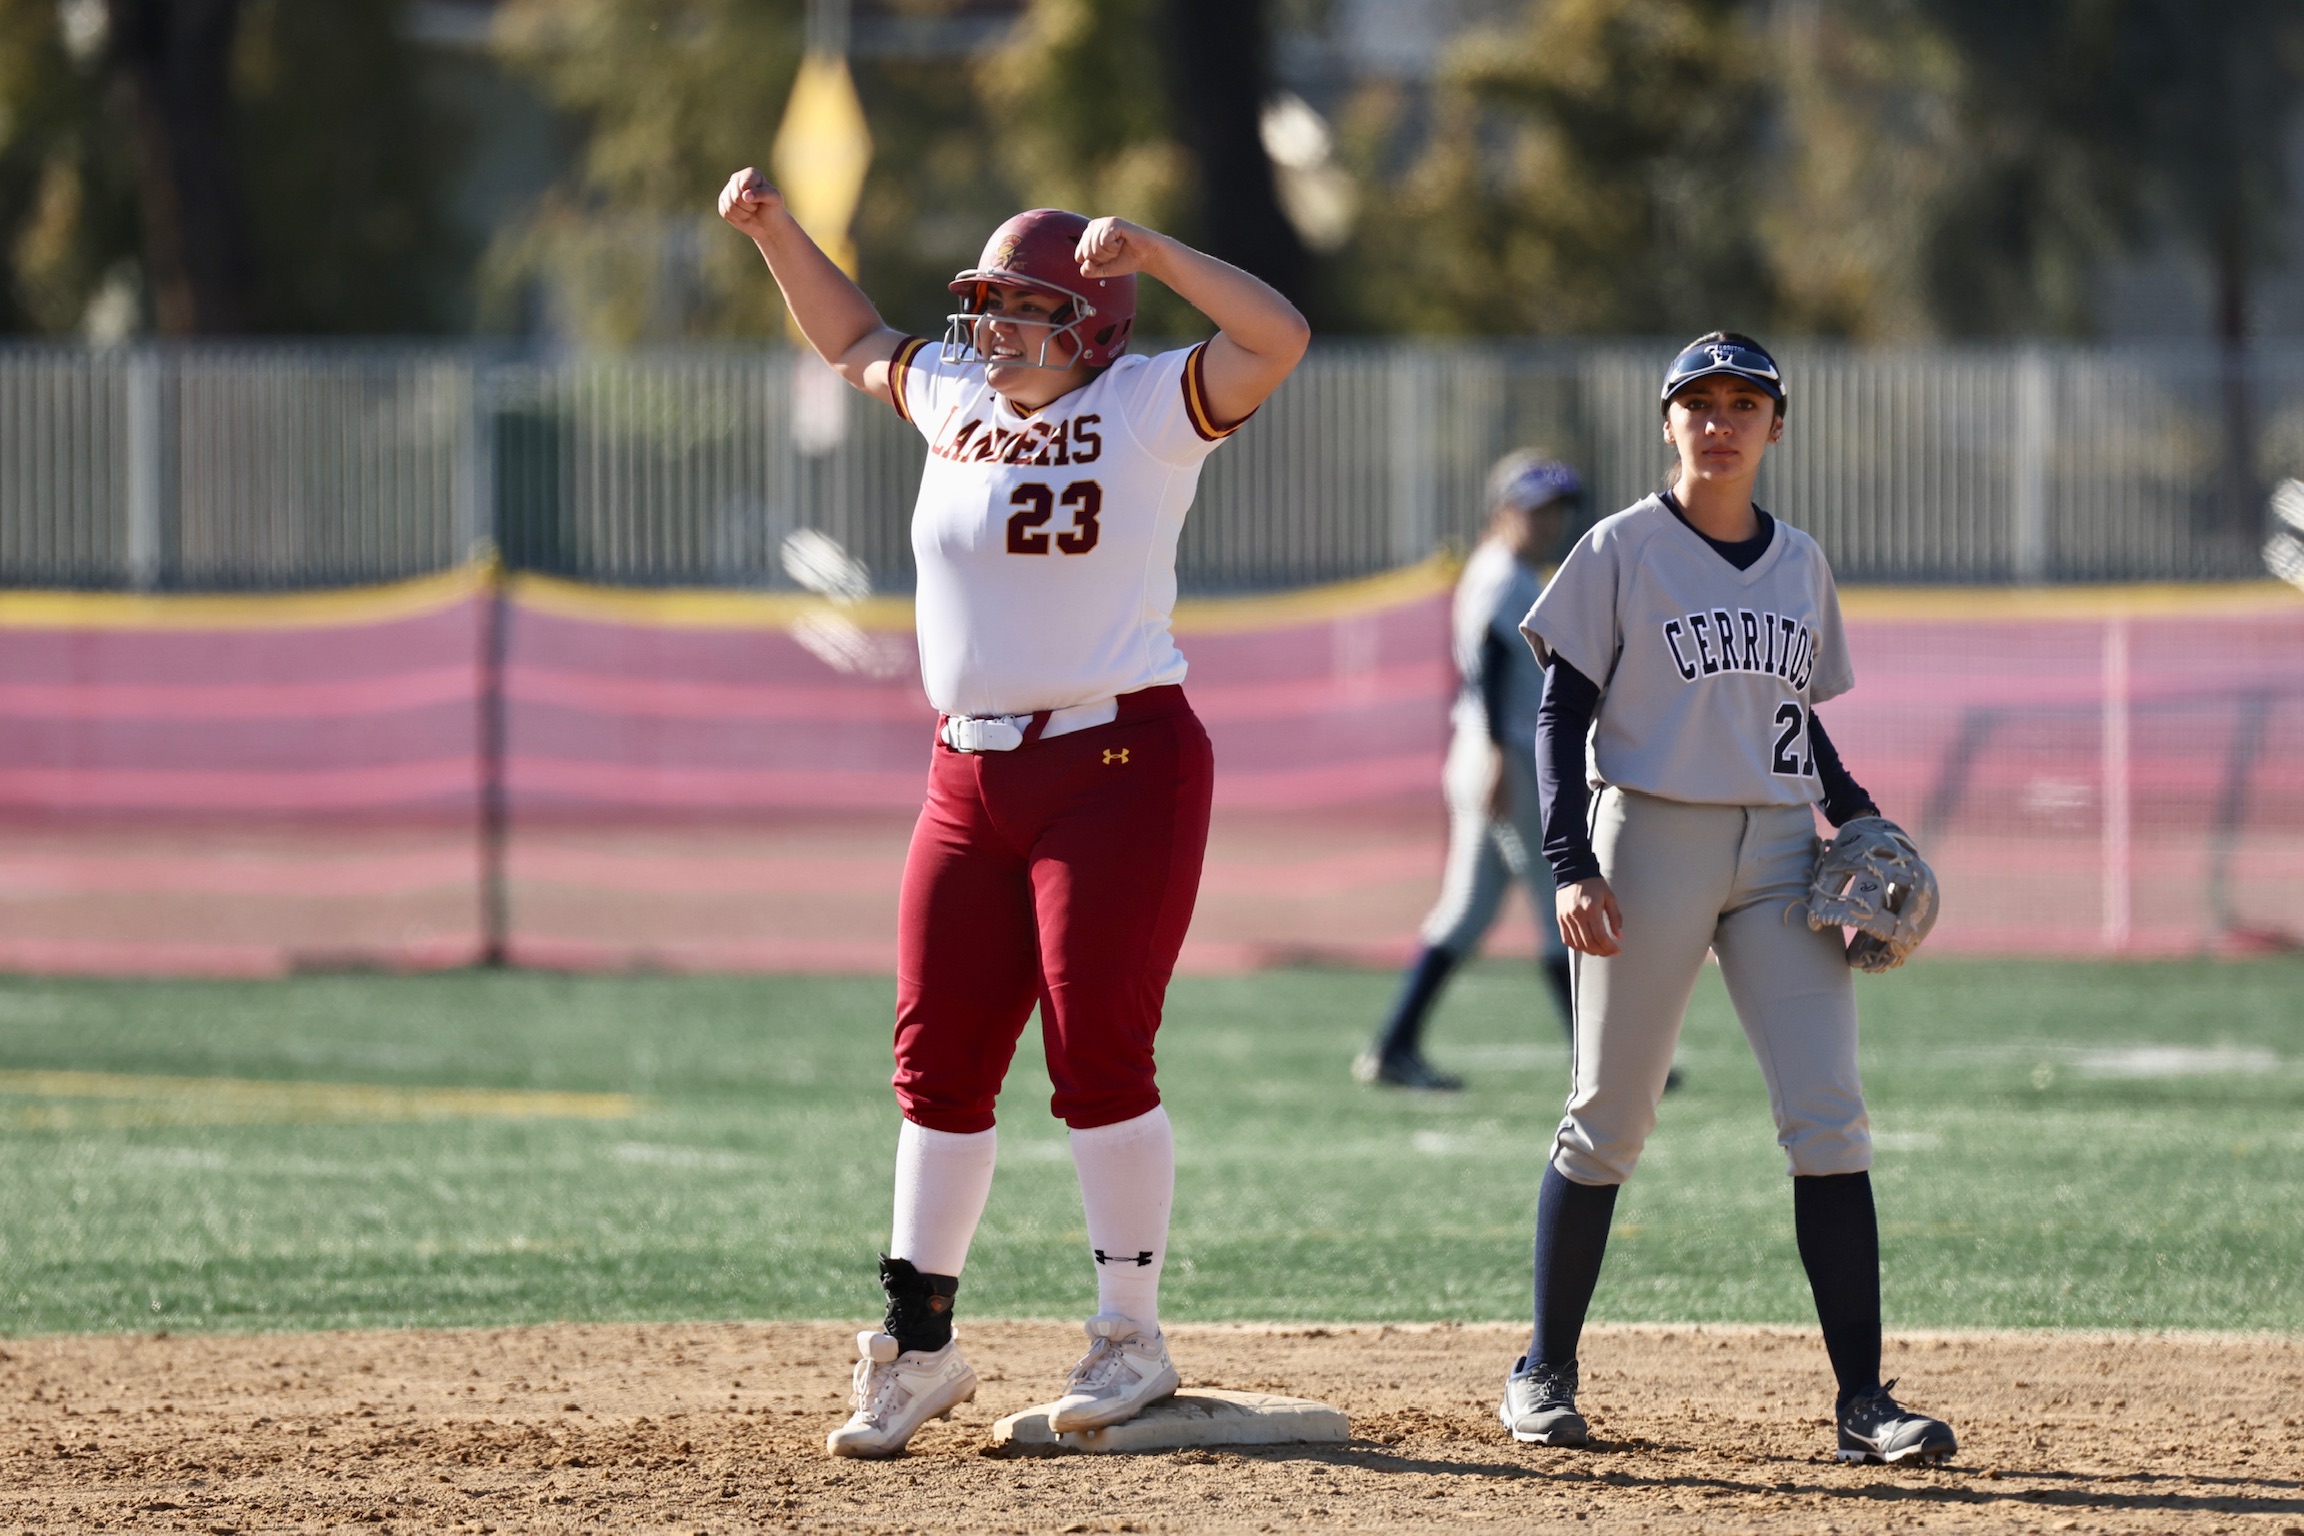 Kiley Kraft is pumped after her double in PCC's win over Cerritos on Thursday (photo by Michael Watkins).